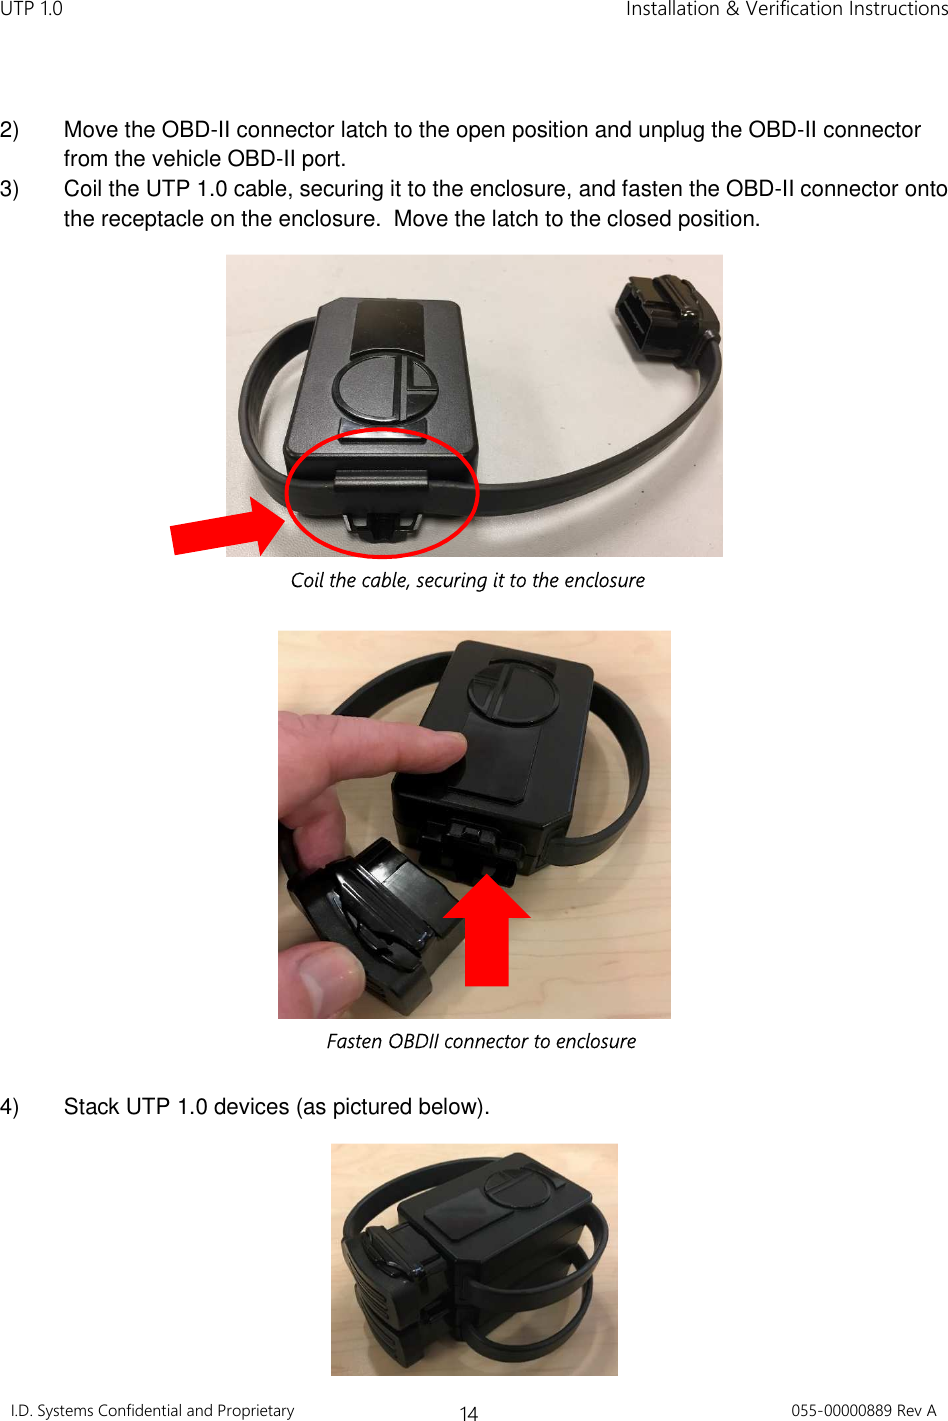 UTP 1.0    Installation &amp; Verification Instructions I.D. Systems Confidential and Proprietary 14 055-00000889 Rev A   2)  Move the OBD-II connector latch to the open position and unplug the OBD-II connector from the vehicle OBD-II port. 3)  Coil the UTP 1.0 cable, securing it to the enclosure, and fasten the OBD-II connector onto the receptacle on the enclosure.  Move the latch to the closed position.     4)  Stack UTP 1.0 devices (as pictured below).  Coil the cable, securing it to the enclosure Fasten OBDII connector to enclosure 